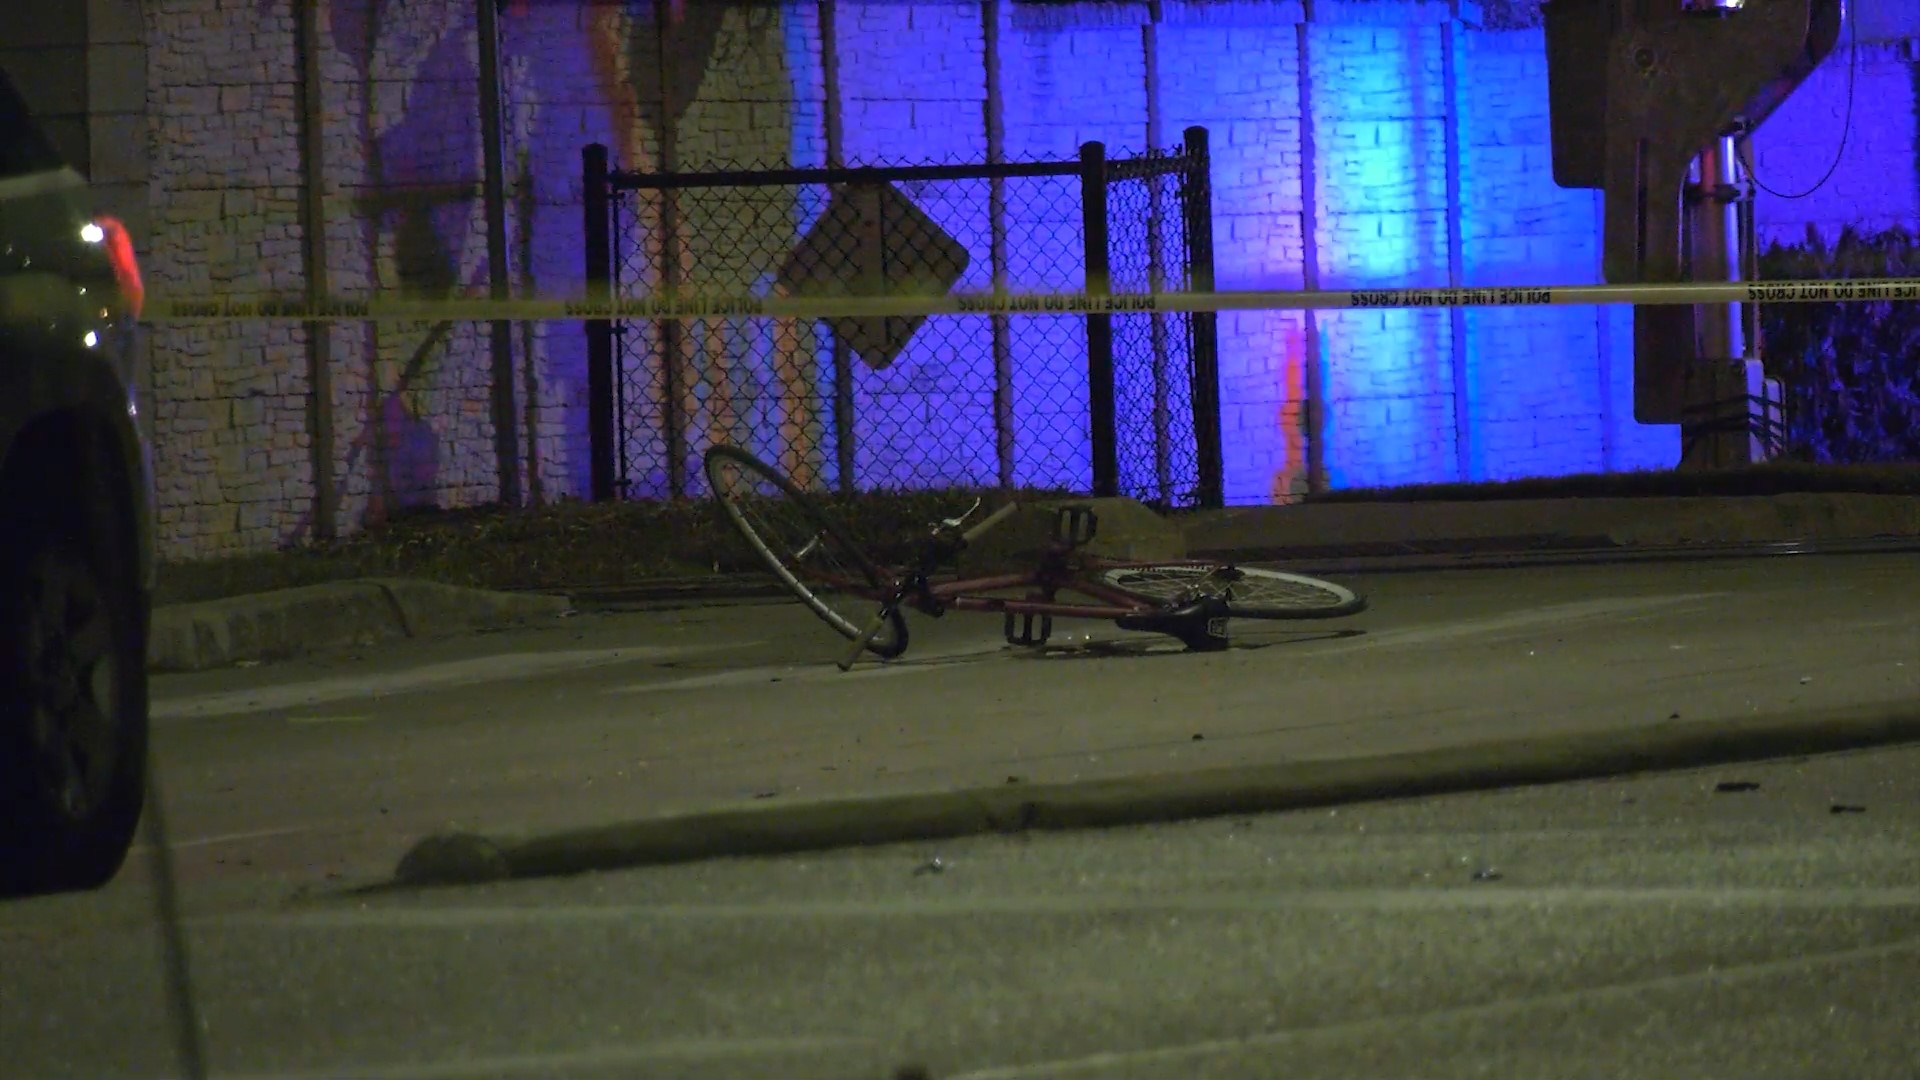 Two men were found dead in a crash involving a motorcycle and a bicycle in east downtown Houston late Sunday night, according to the Houston Police Department.